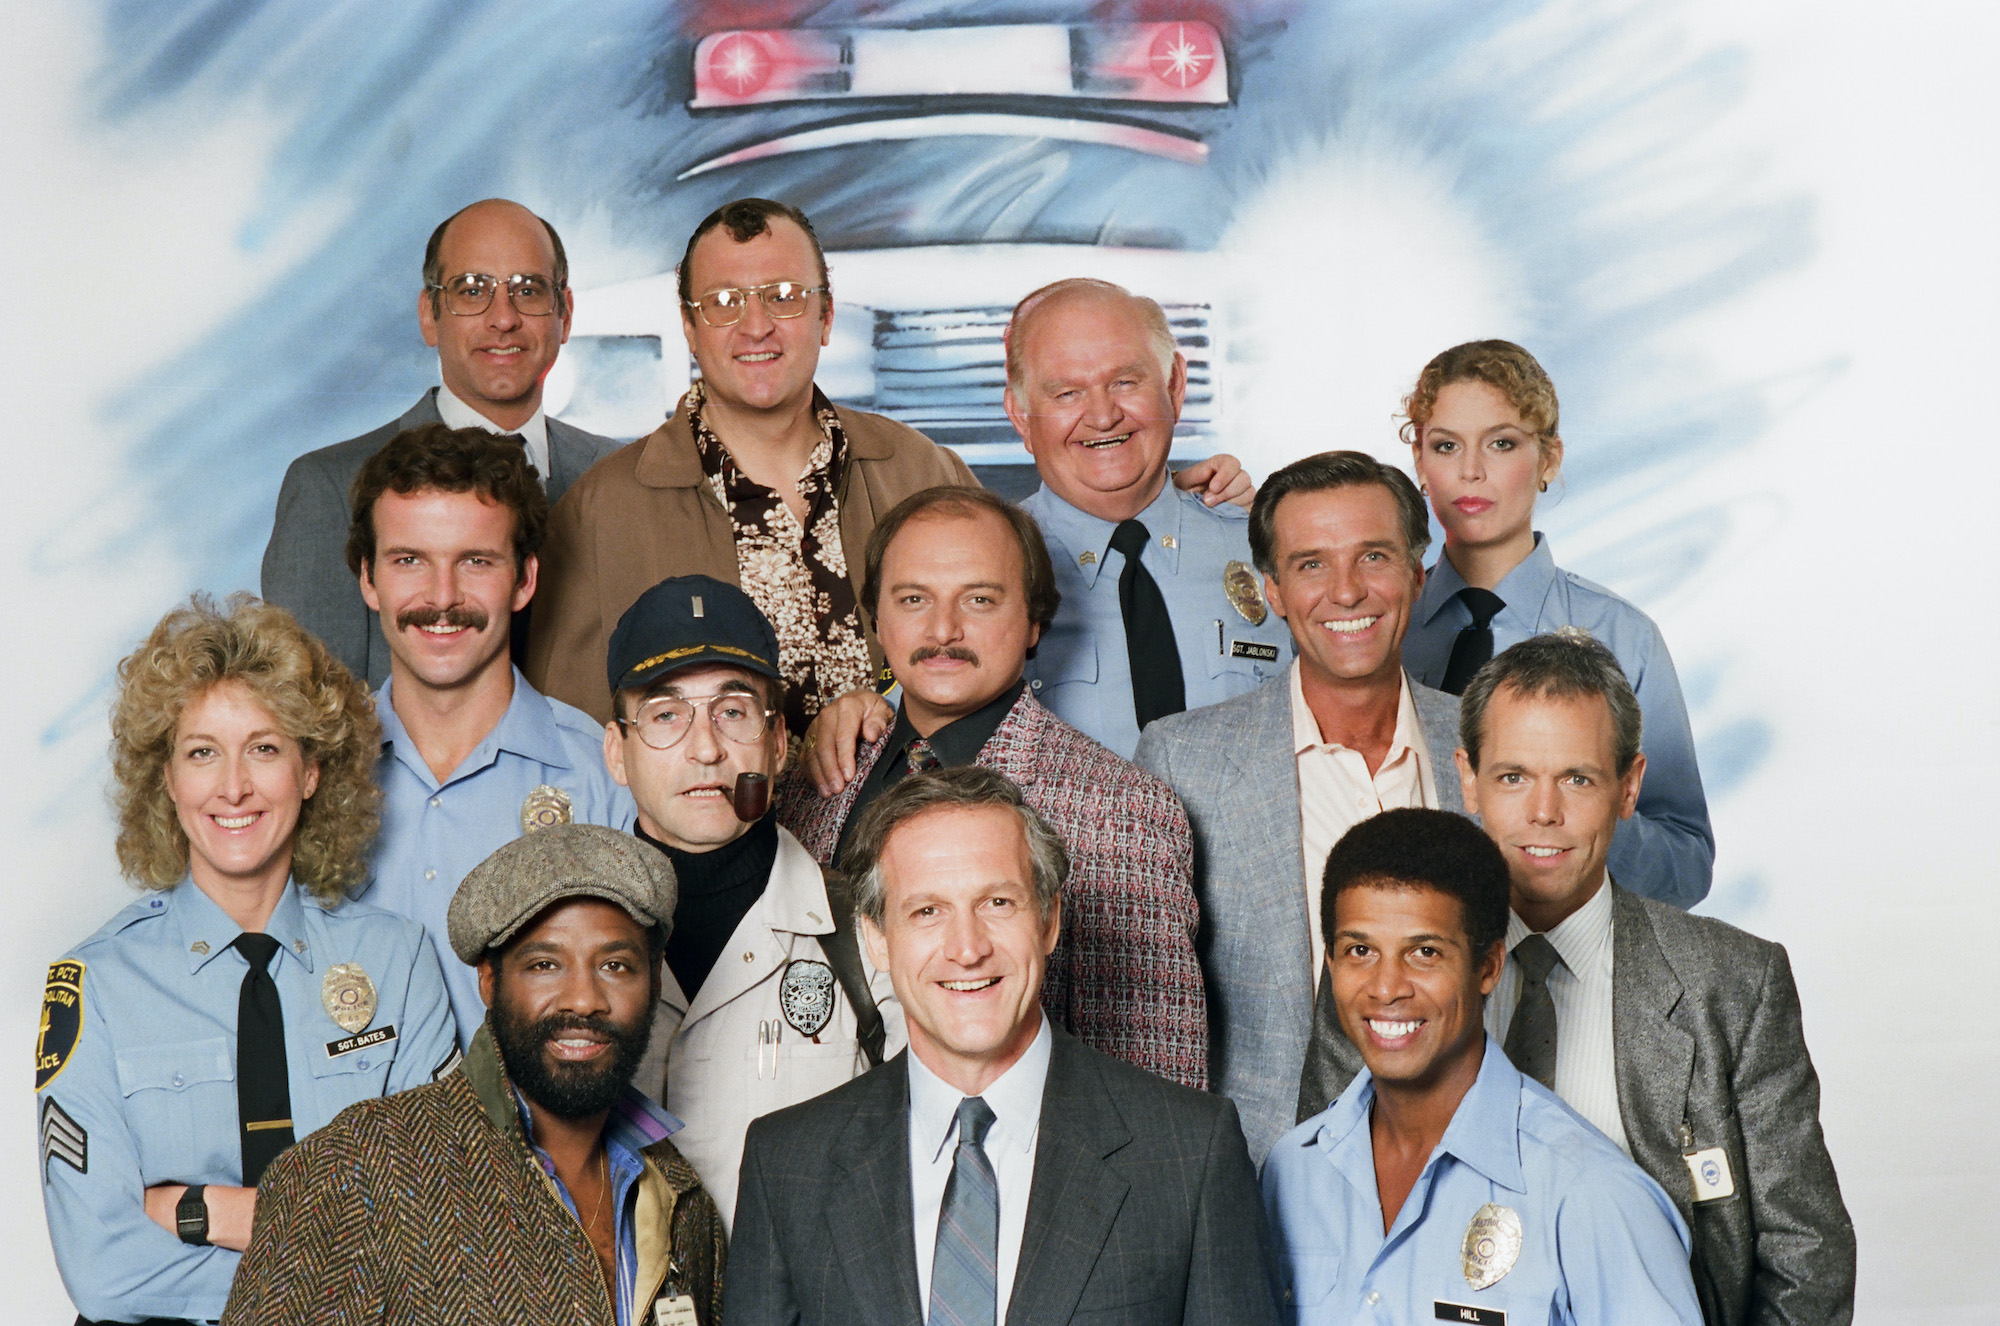 Hill Street Blues season 7 cast smiling in front of a backdrop featuring an illustration of a police car